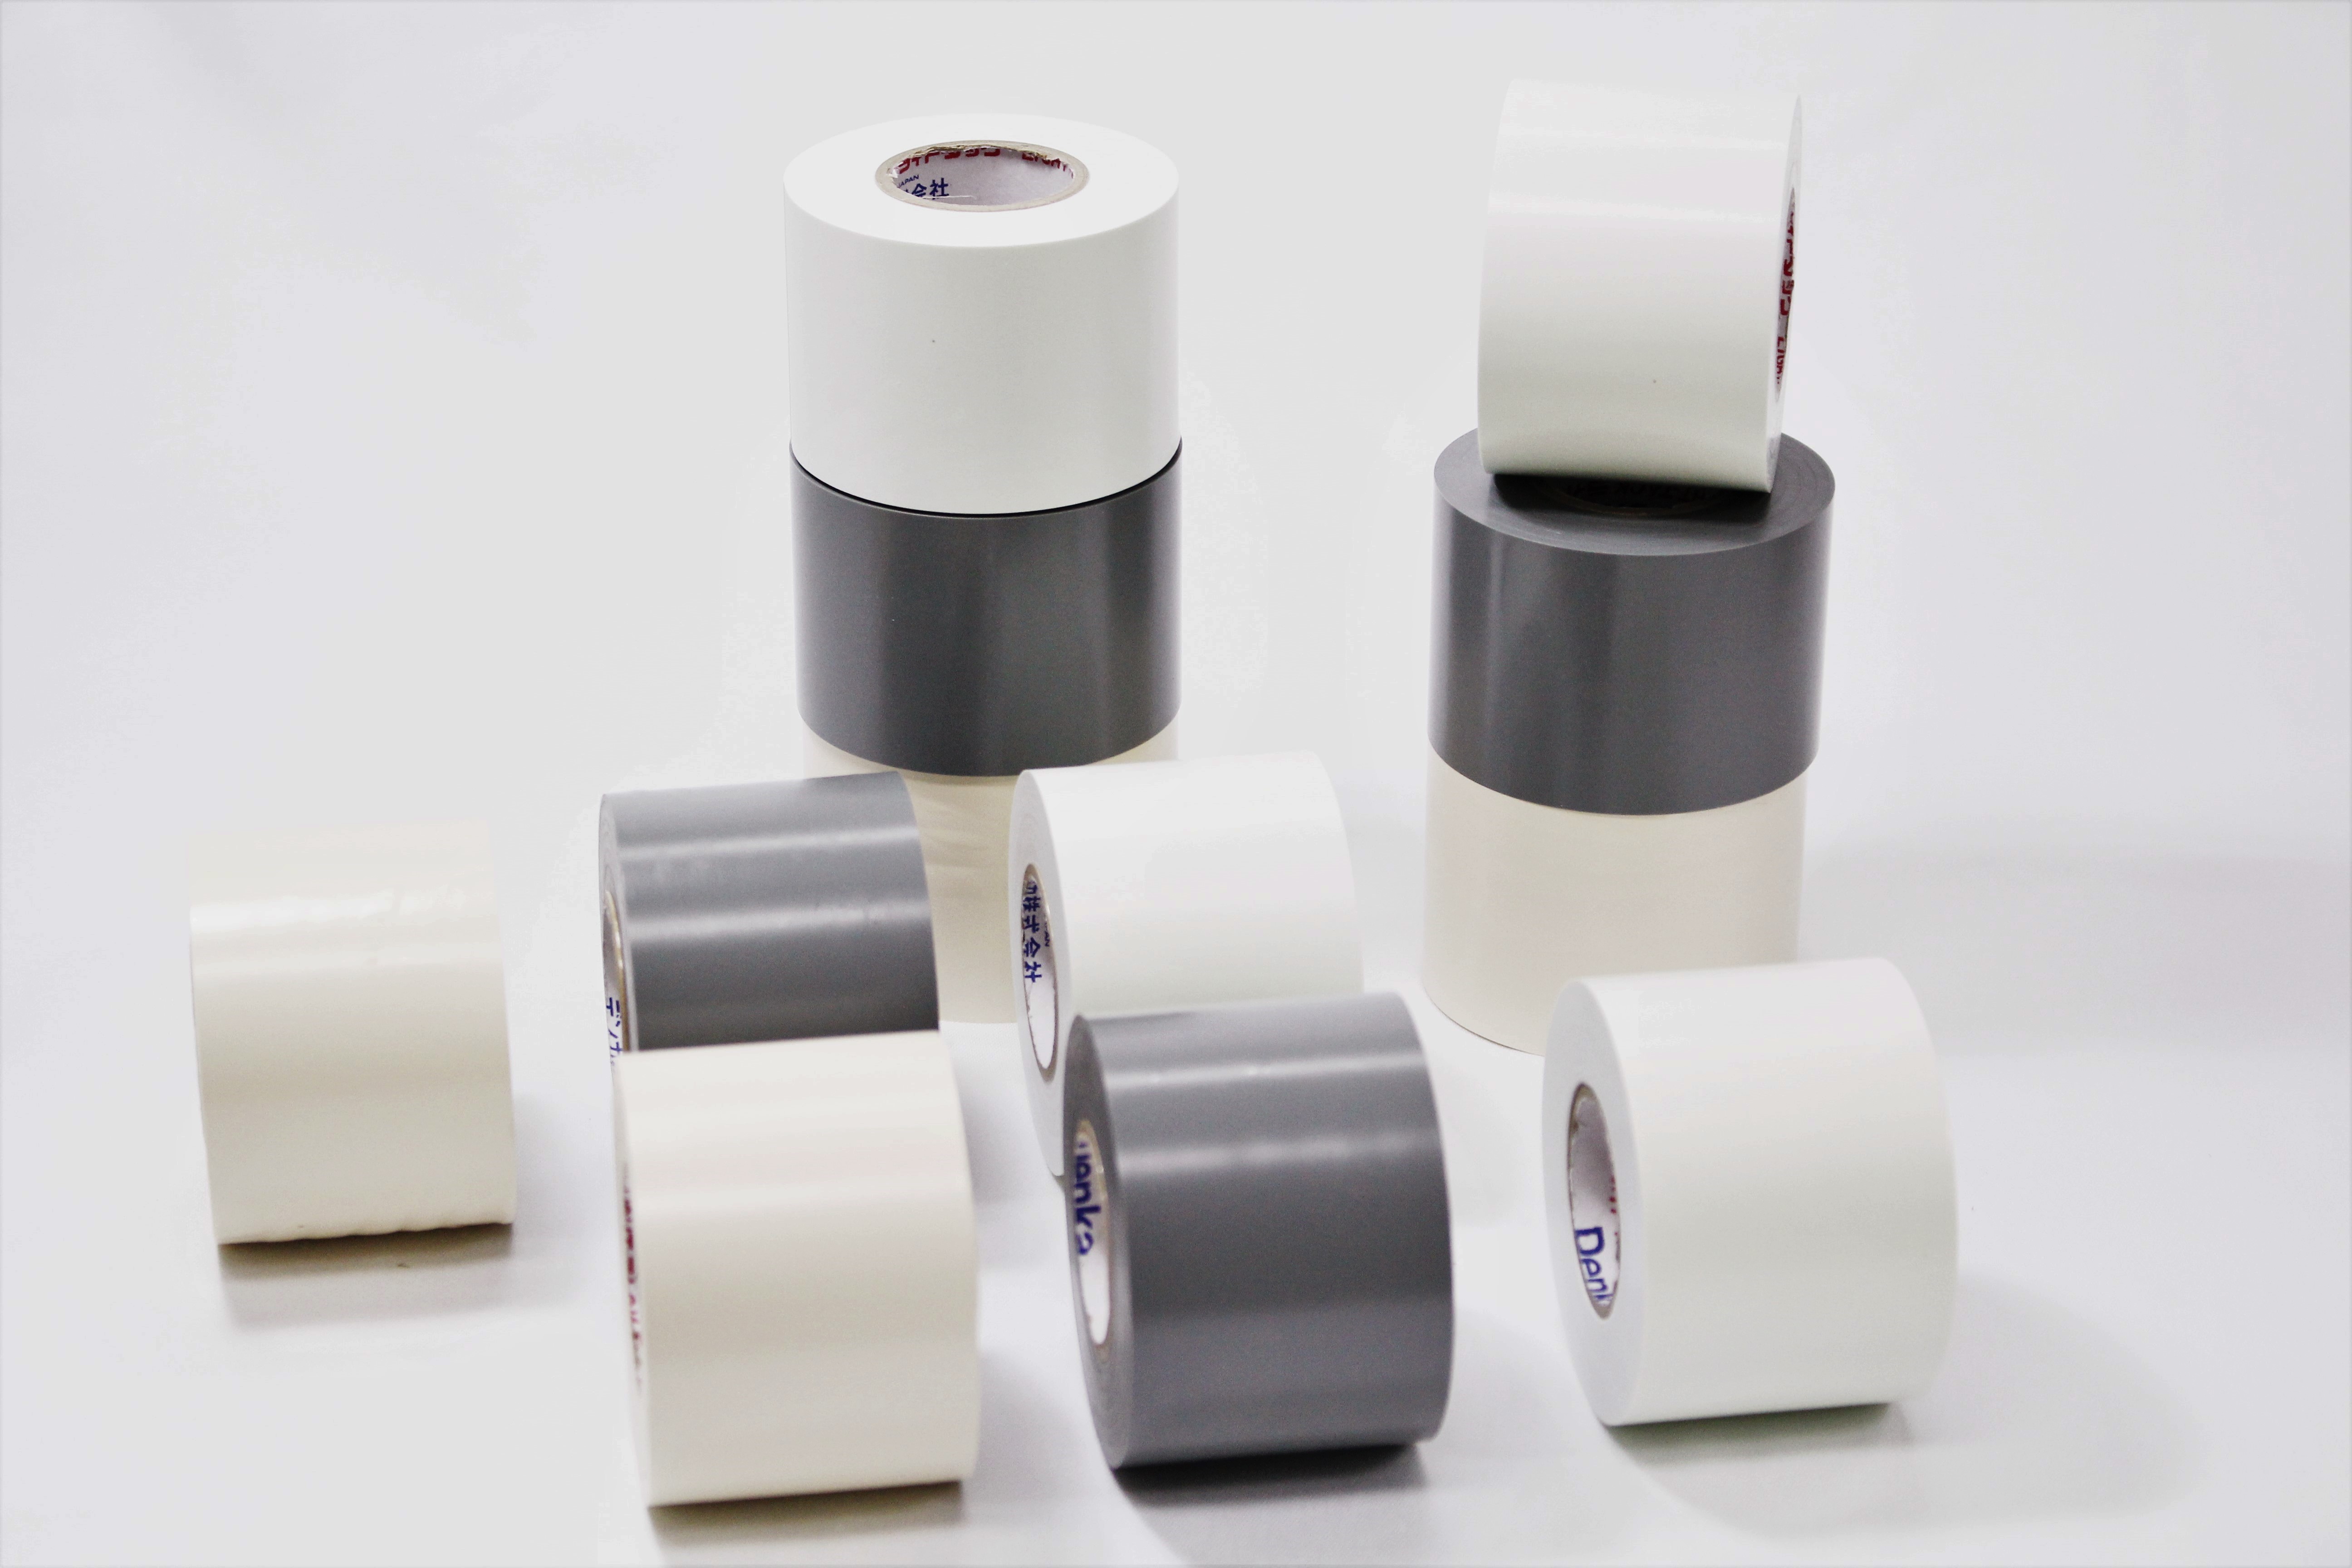 Vinyl tape for air conditioning ducts